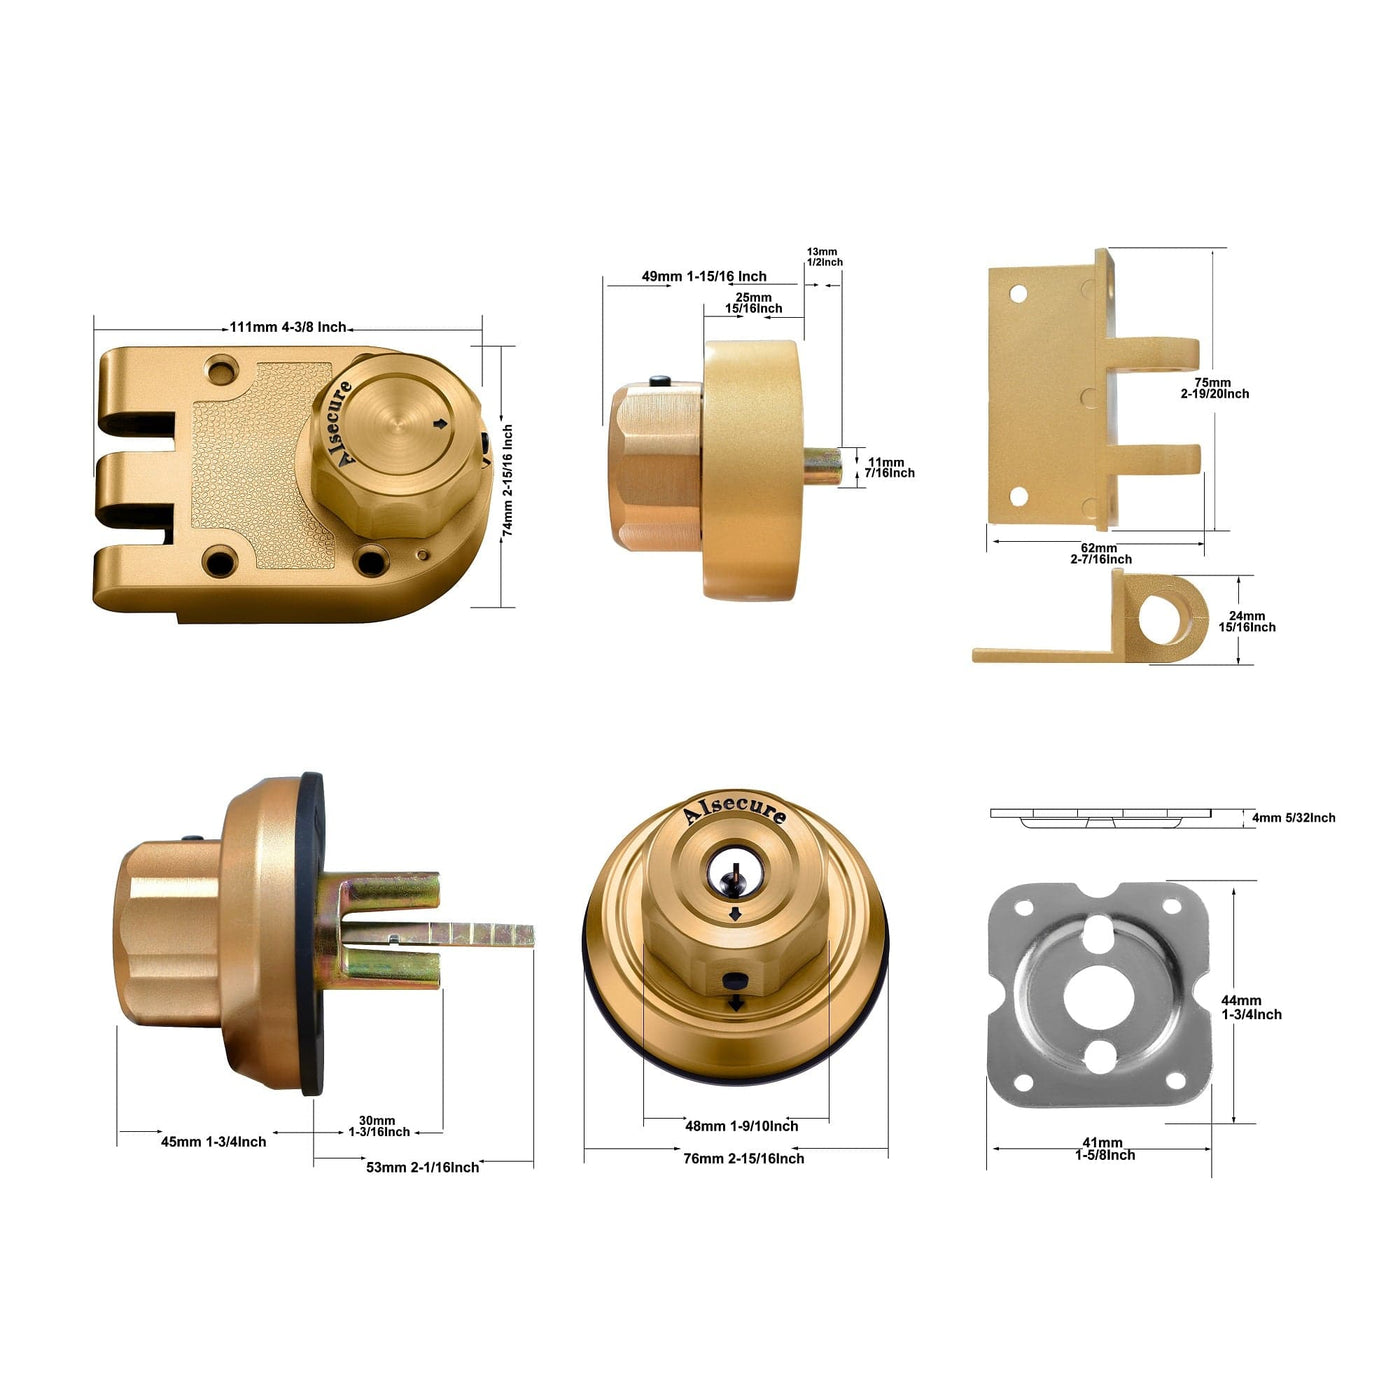 2*A9（1*brass+1*silver） AIsecure Jimmy Proof Lock (stainless steel casting) --- Keyed alike combo